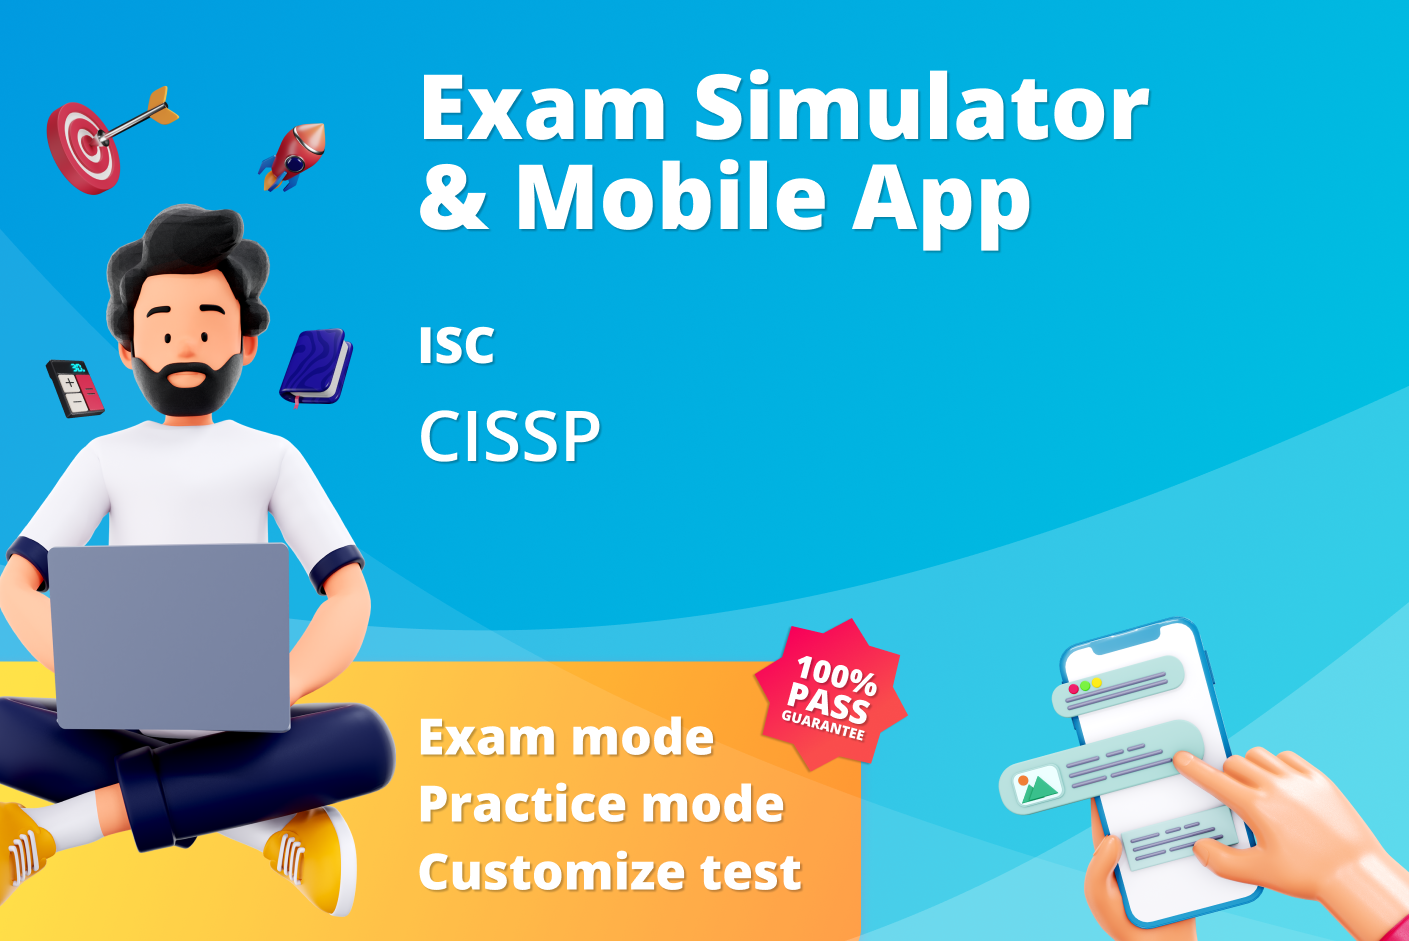 Cissp mock exams - Prepare for the CISSP certification with comprehensive practice tests in Canada